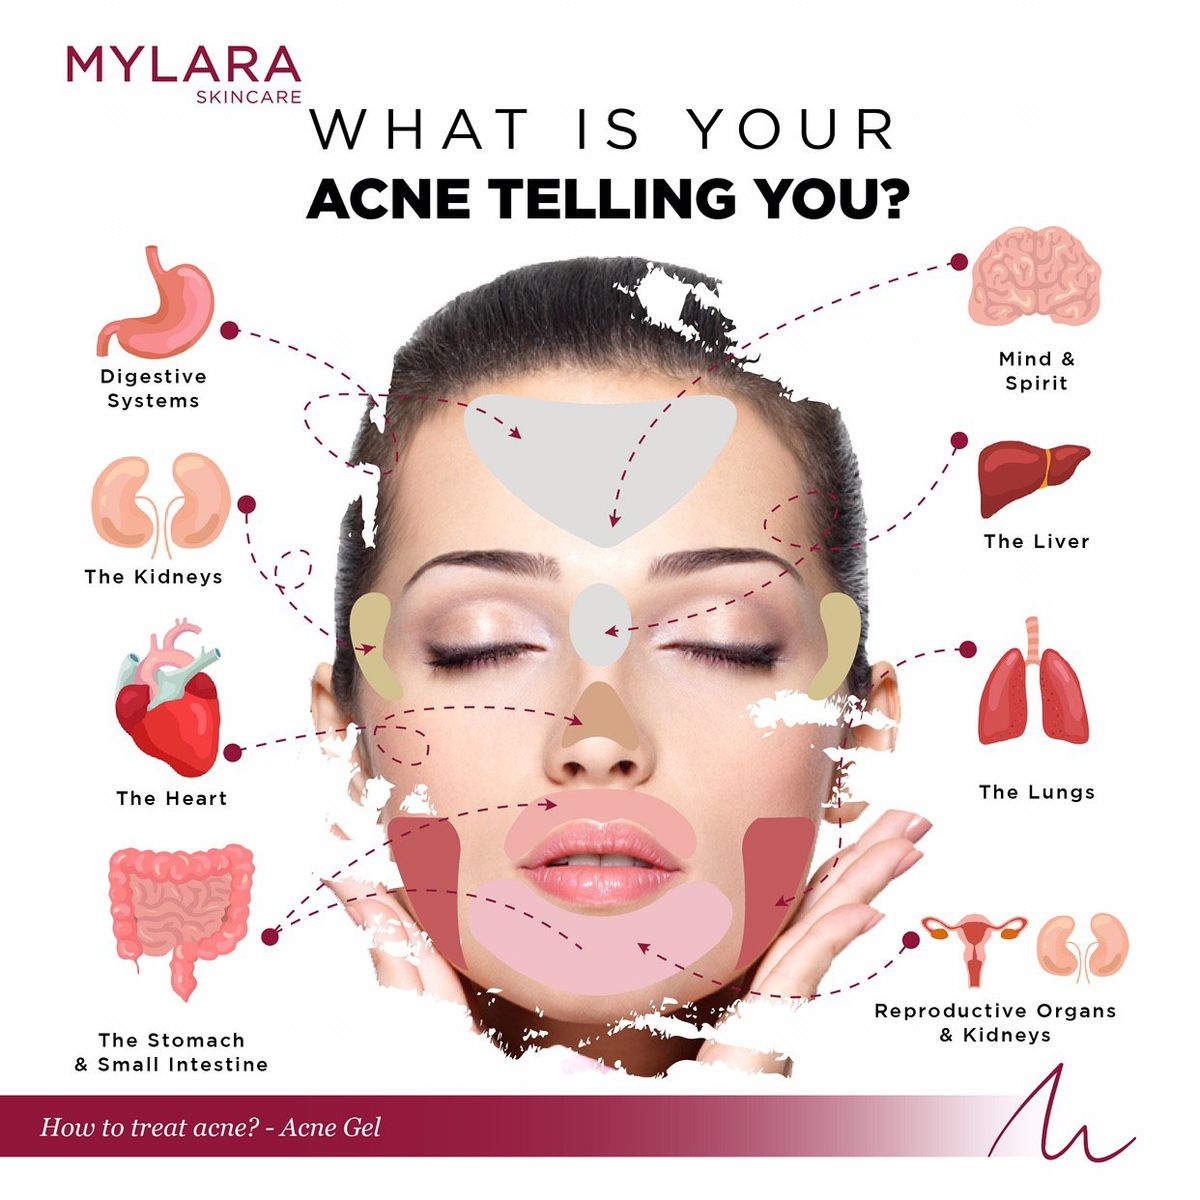 WHAT IS YOUR ACNE TELLING YOU?